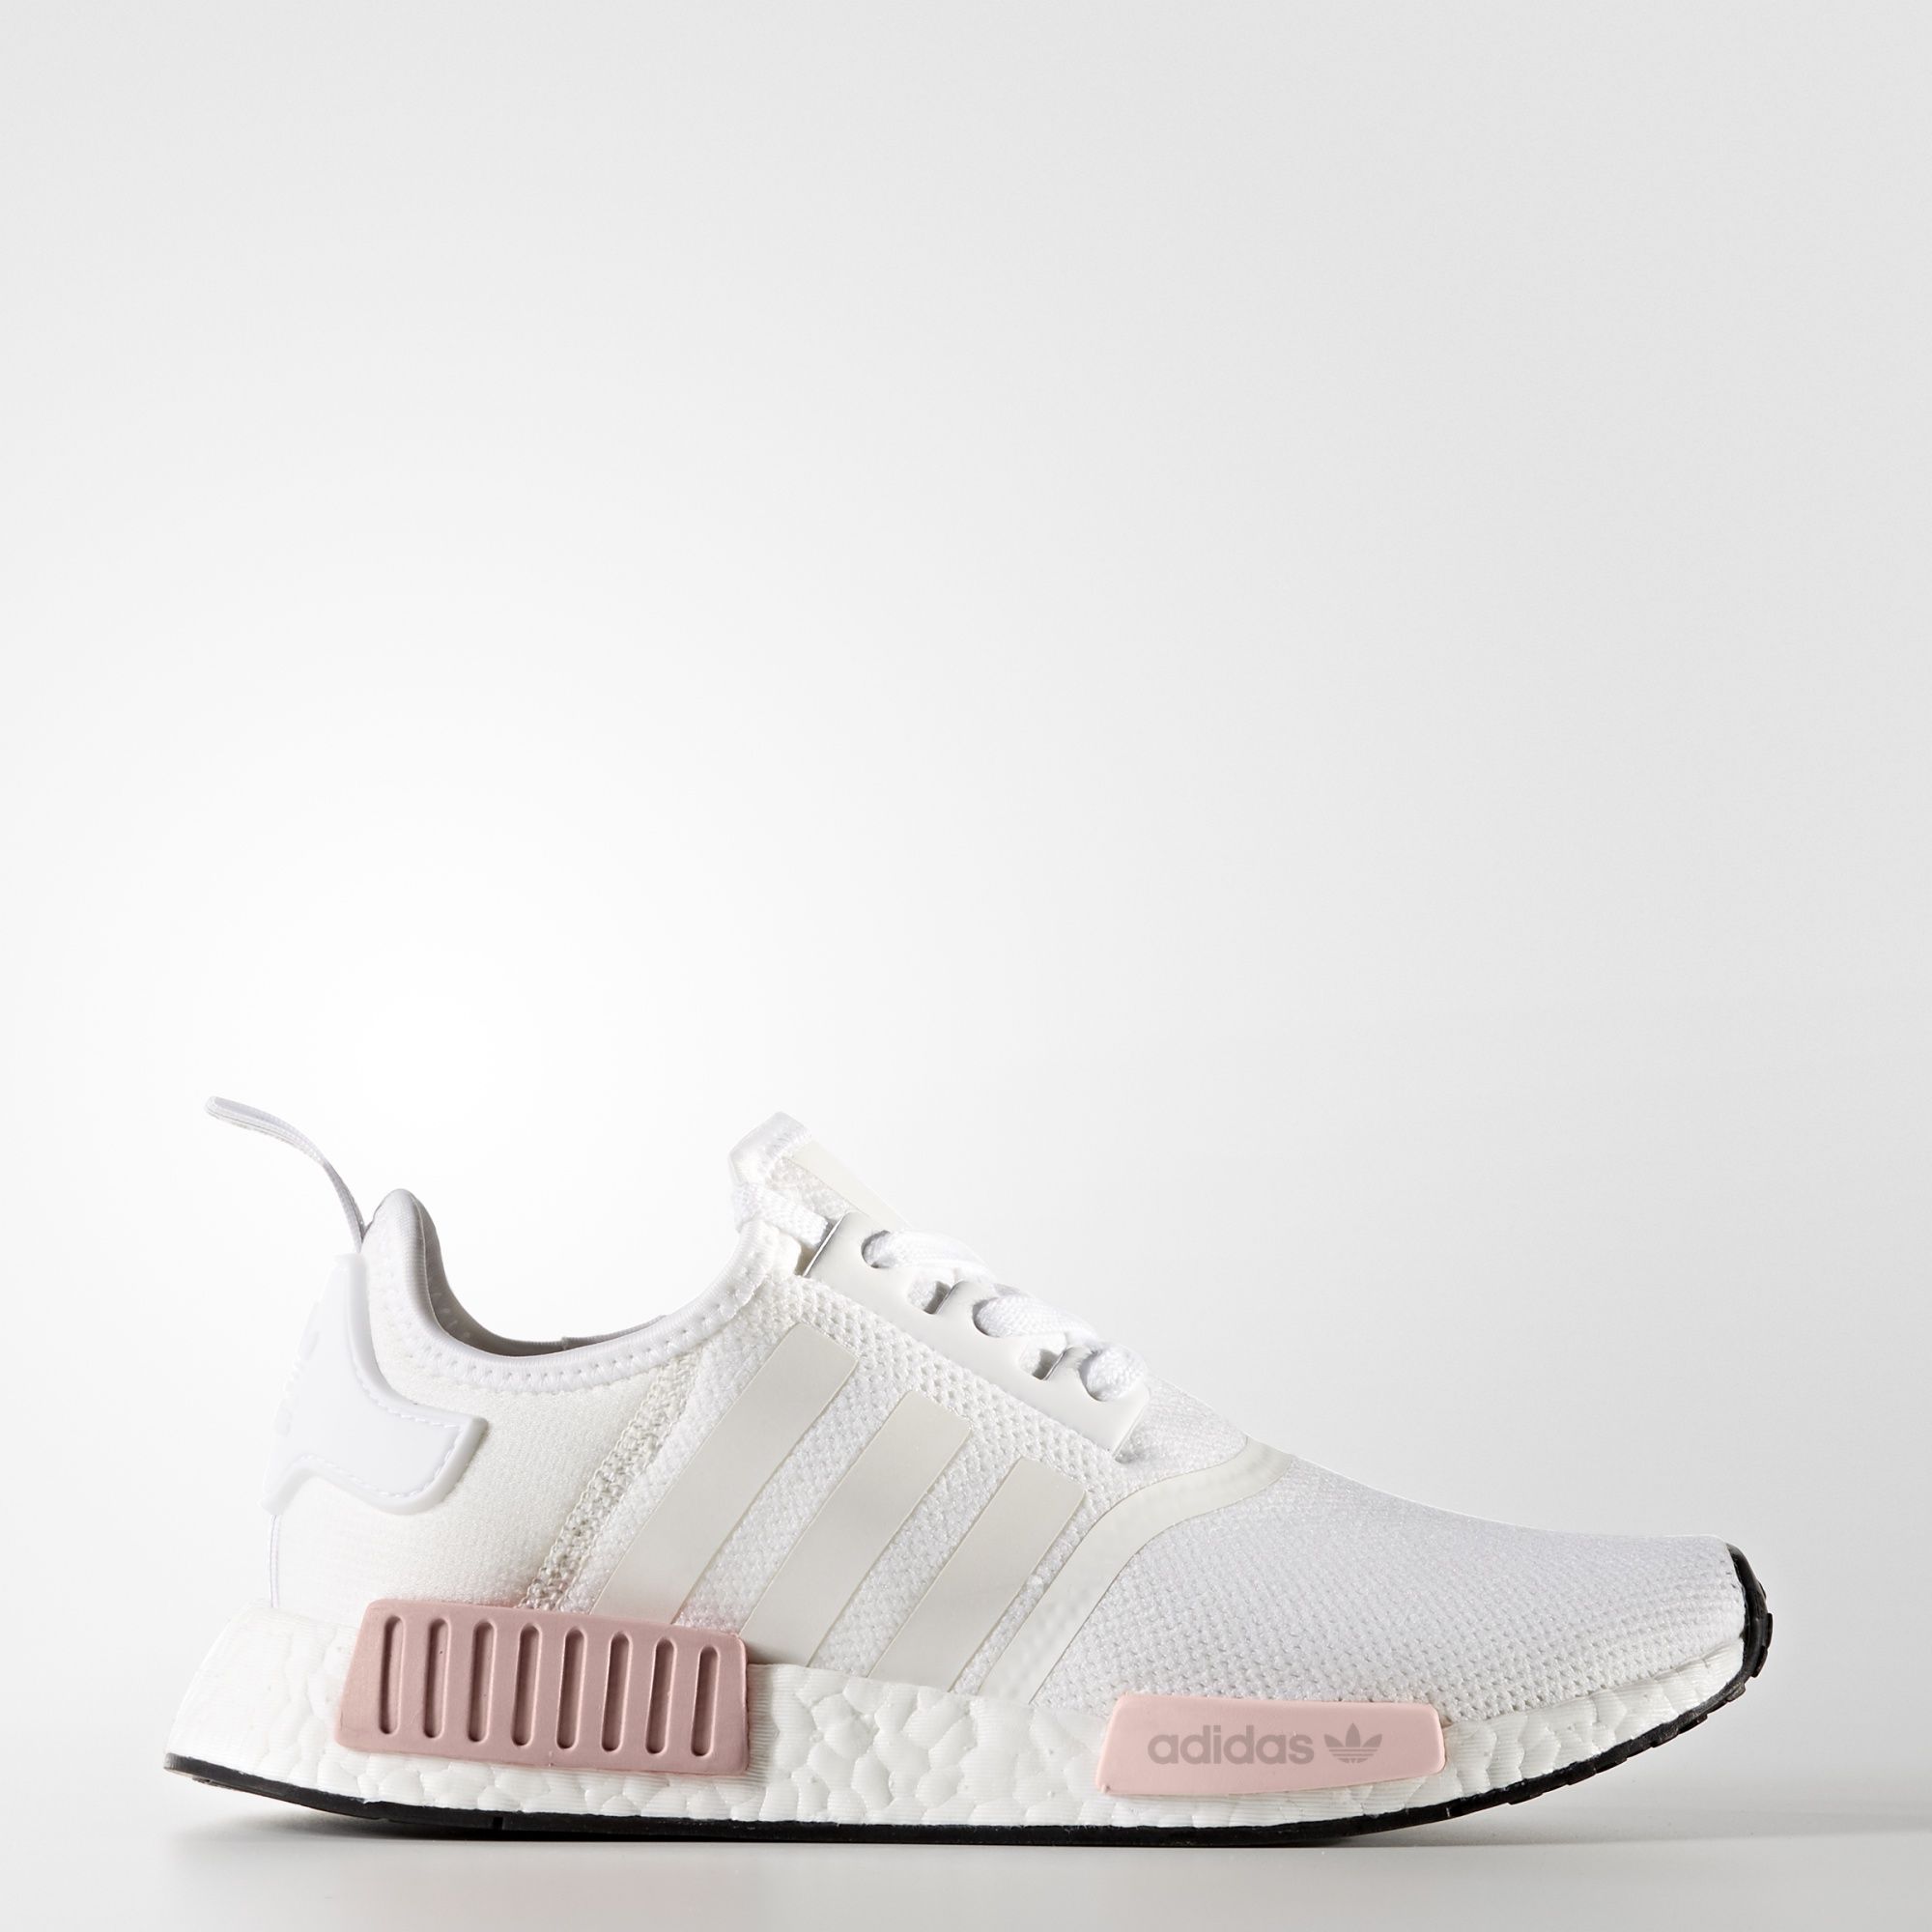 adidas-wmns-nmd_r1-white-icey-pink-2